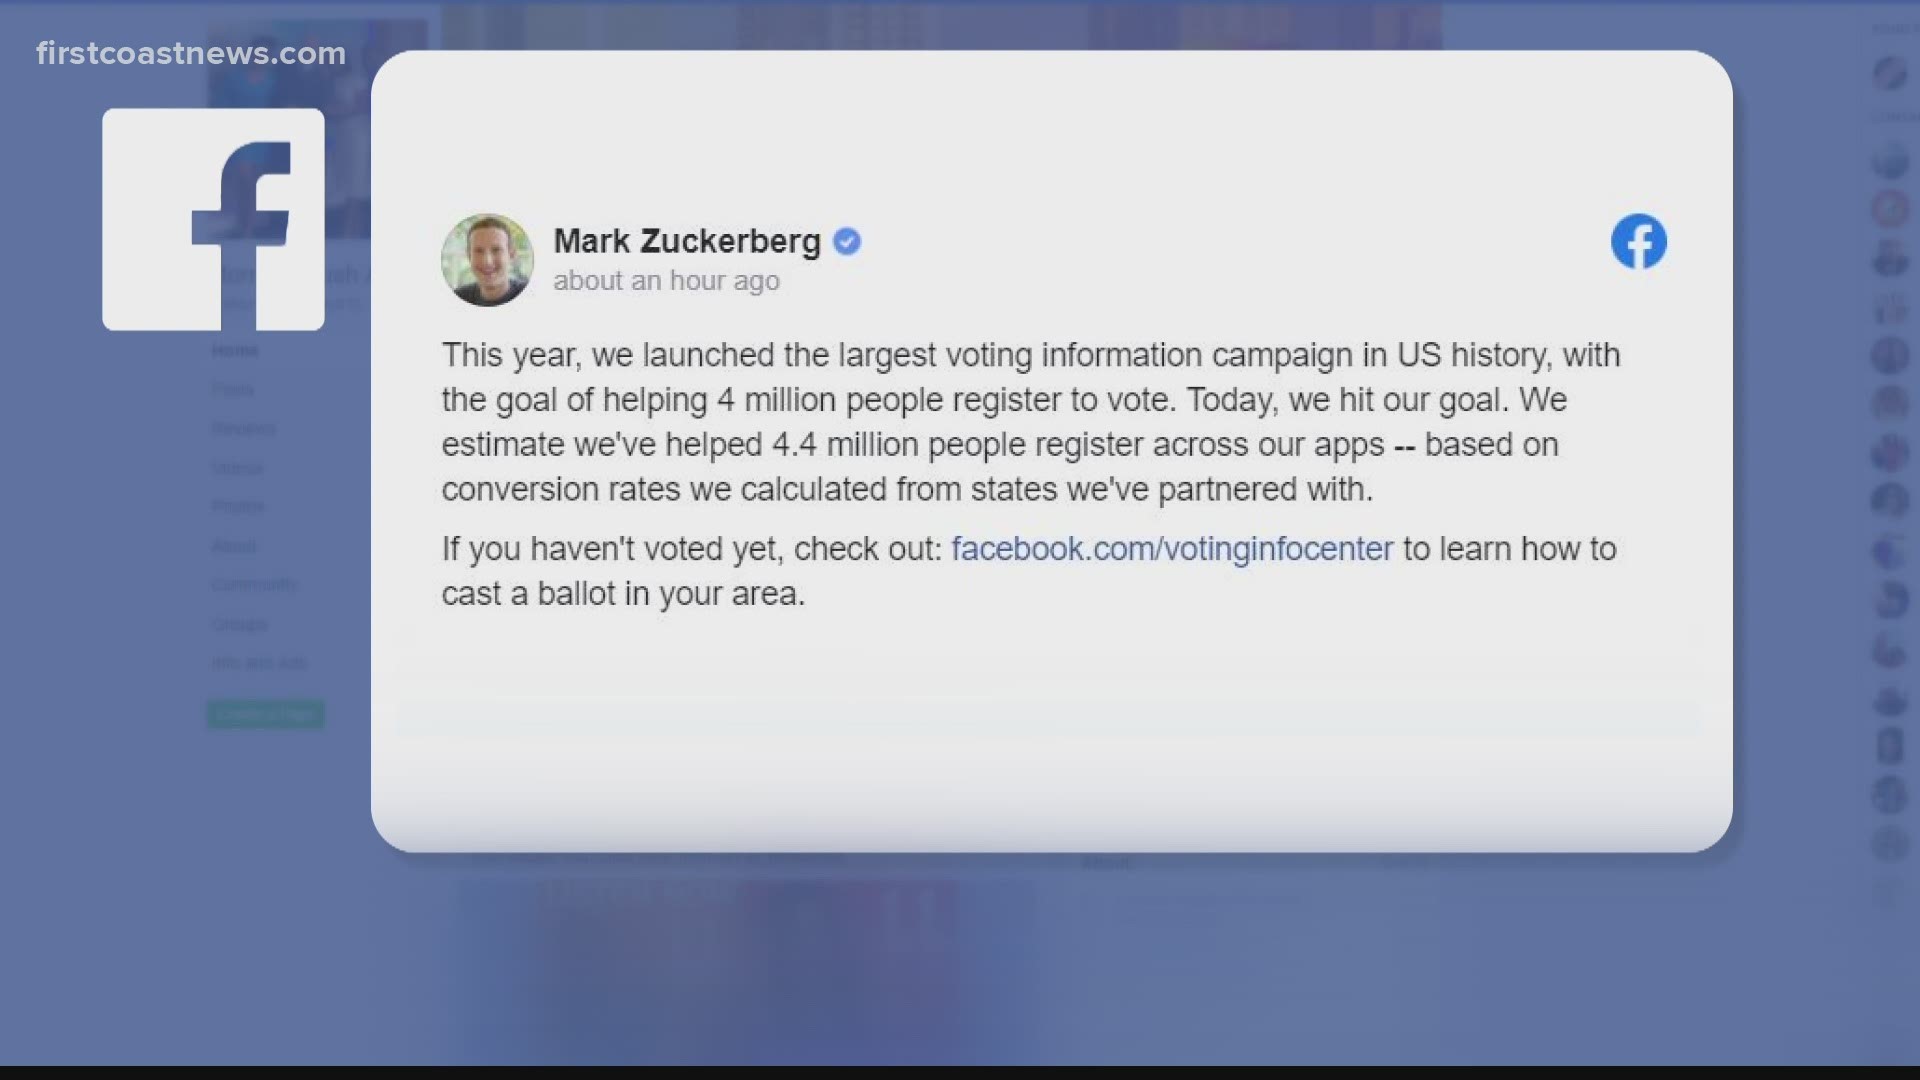 The social media giant says it's the largest voter information campaign in U.S. history.